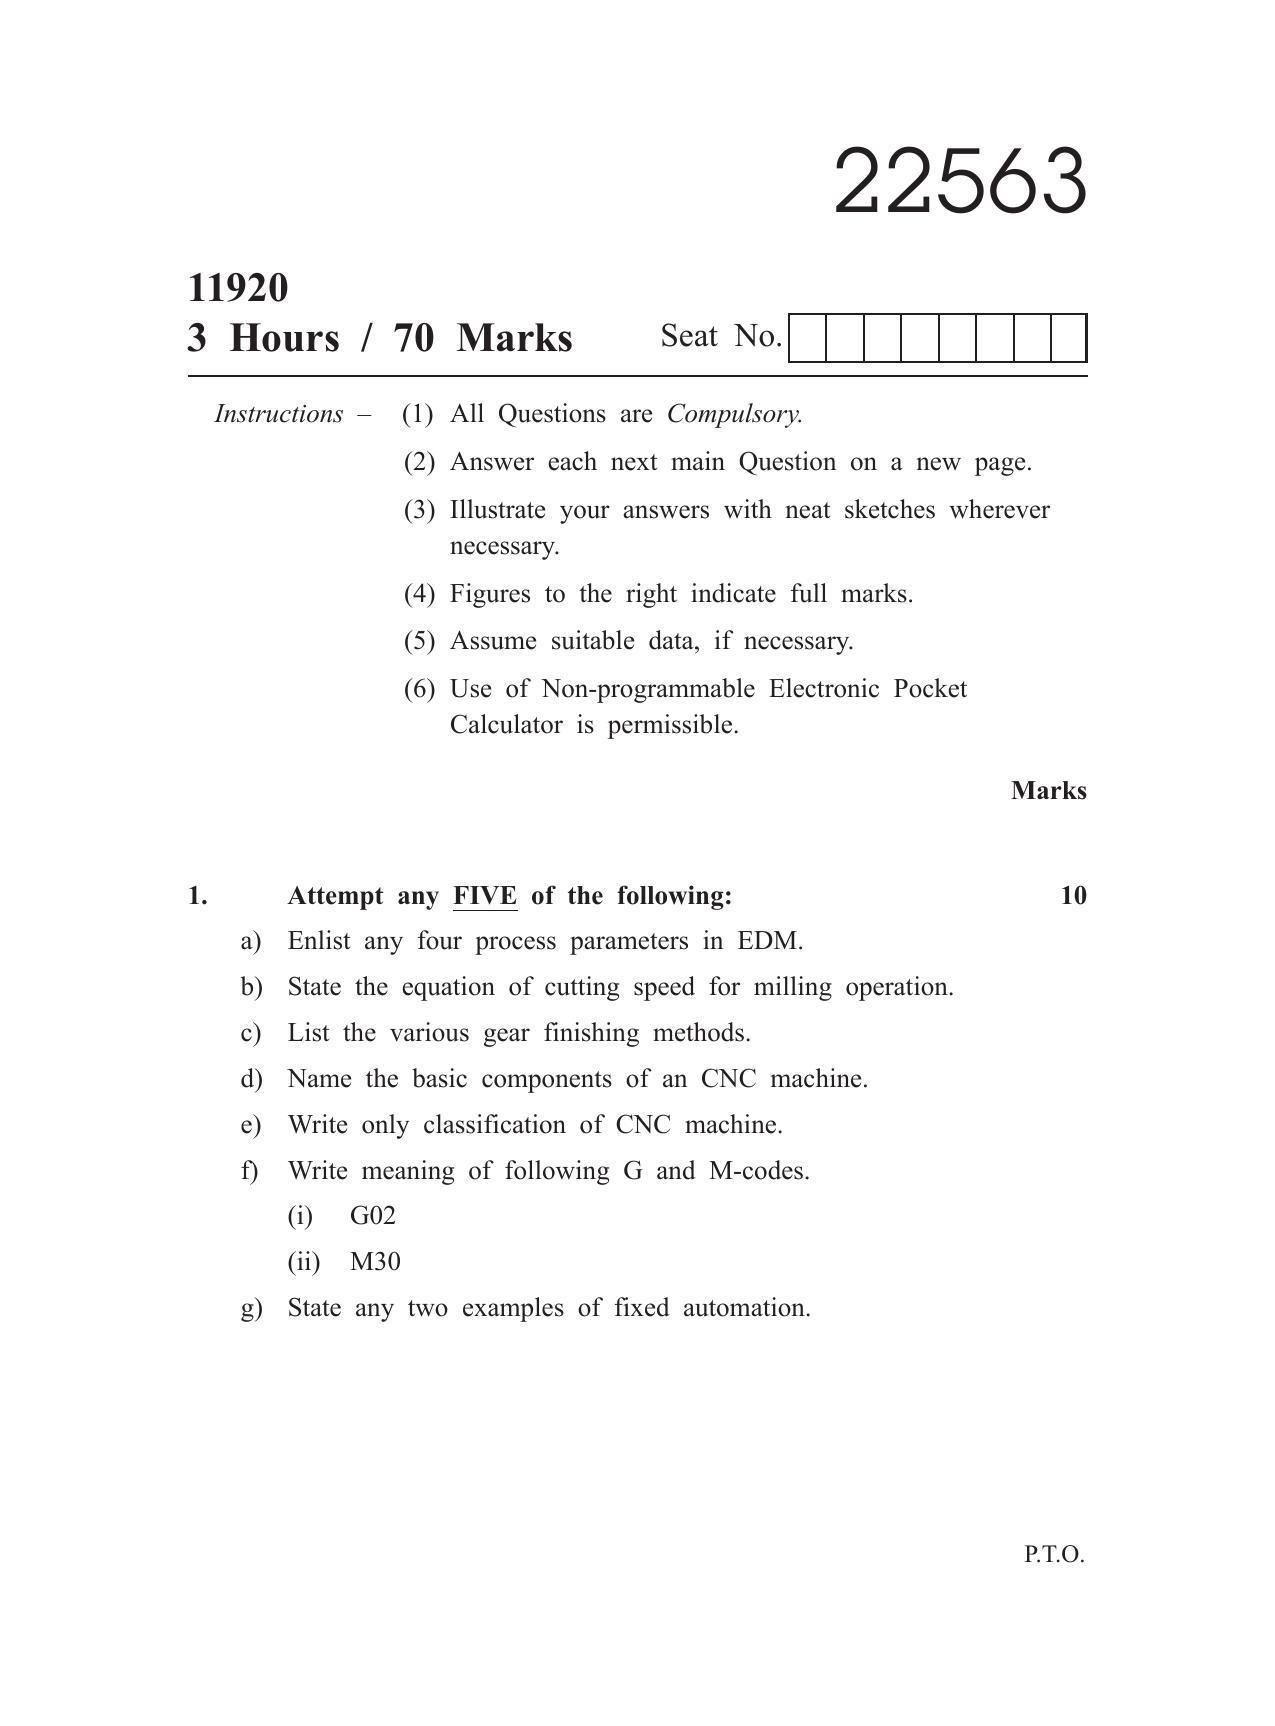 MSBTE Question Paper - 2019 - Advanced Manufacturing Processes - Page 1